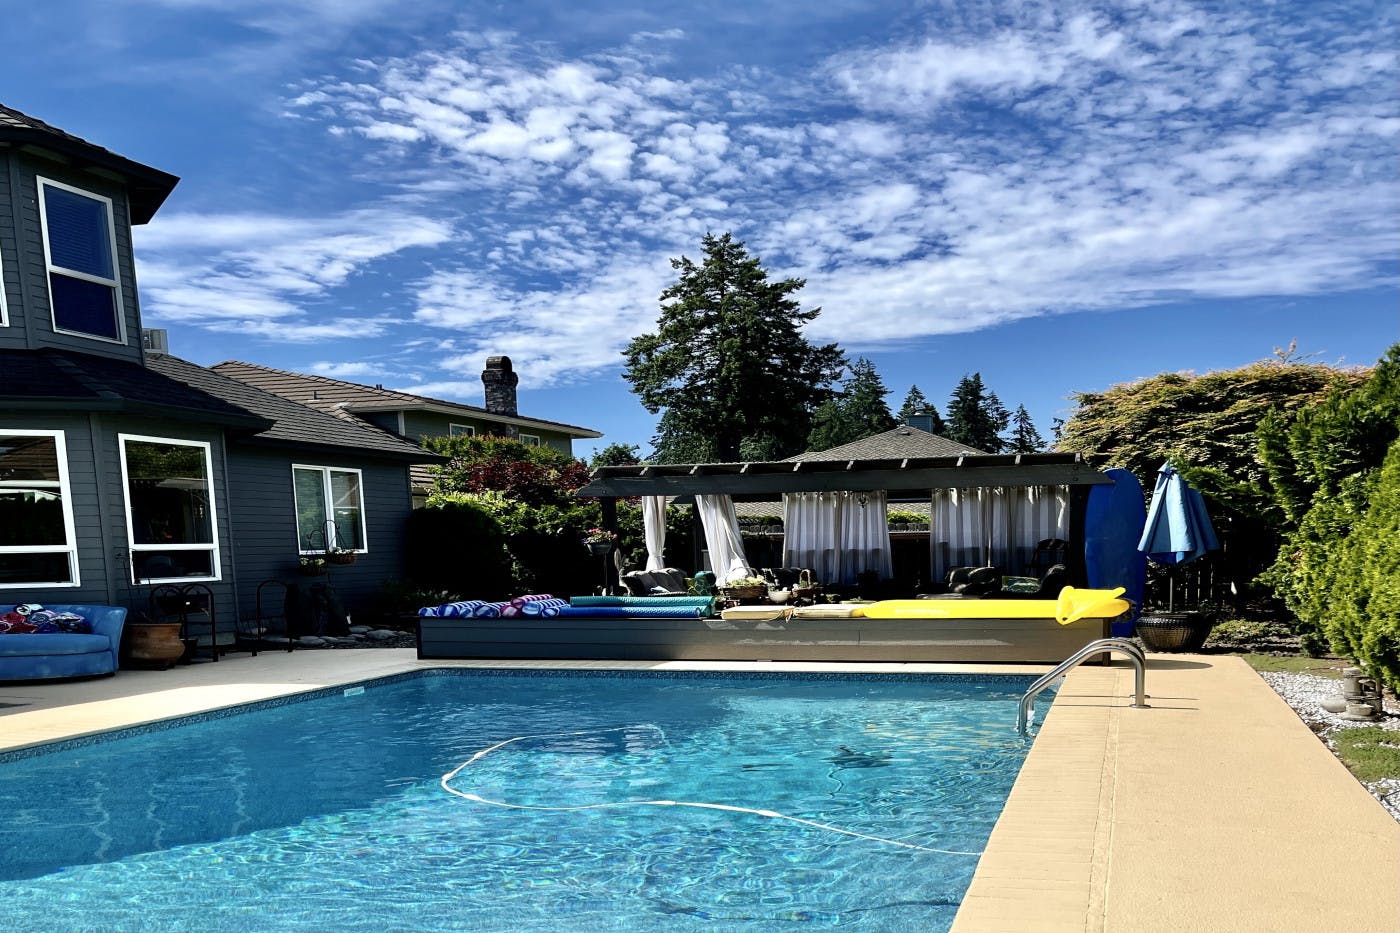 Top 10 Pool Party Venues in Portland, OR - Swimply